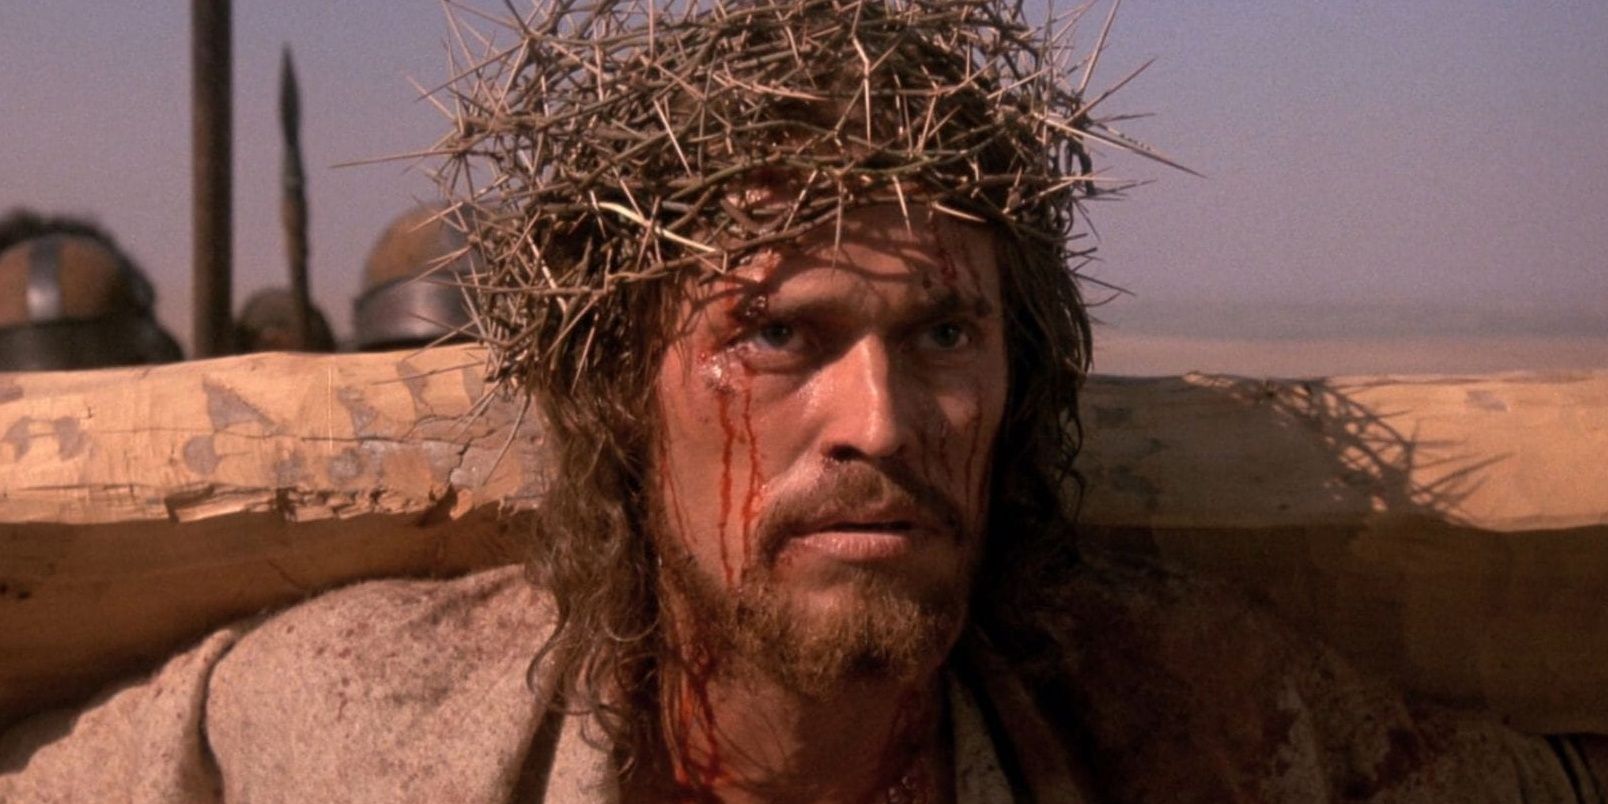 Jesus on the cross in The Last Temptation of Christ